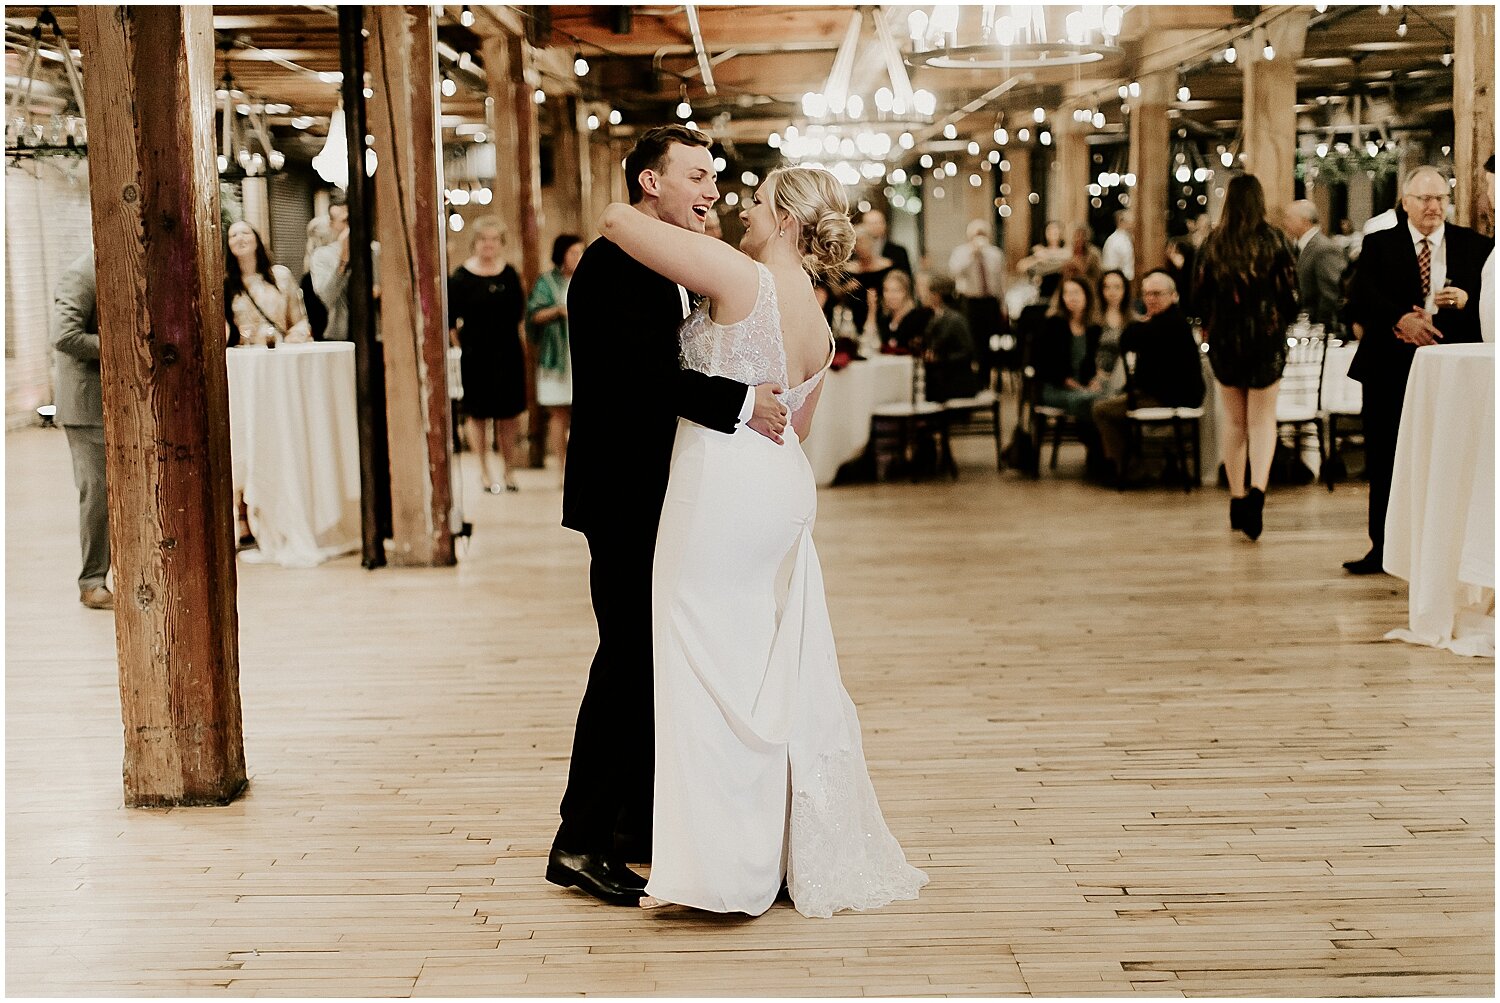  bride and groom’s first dance  